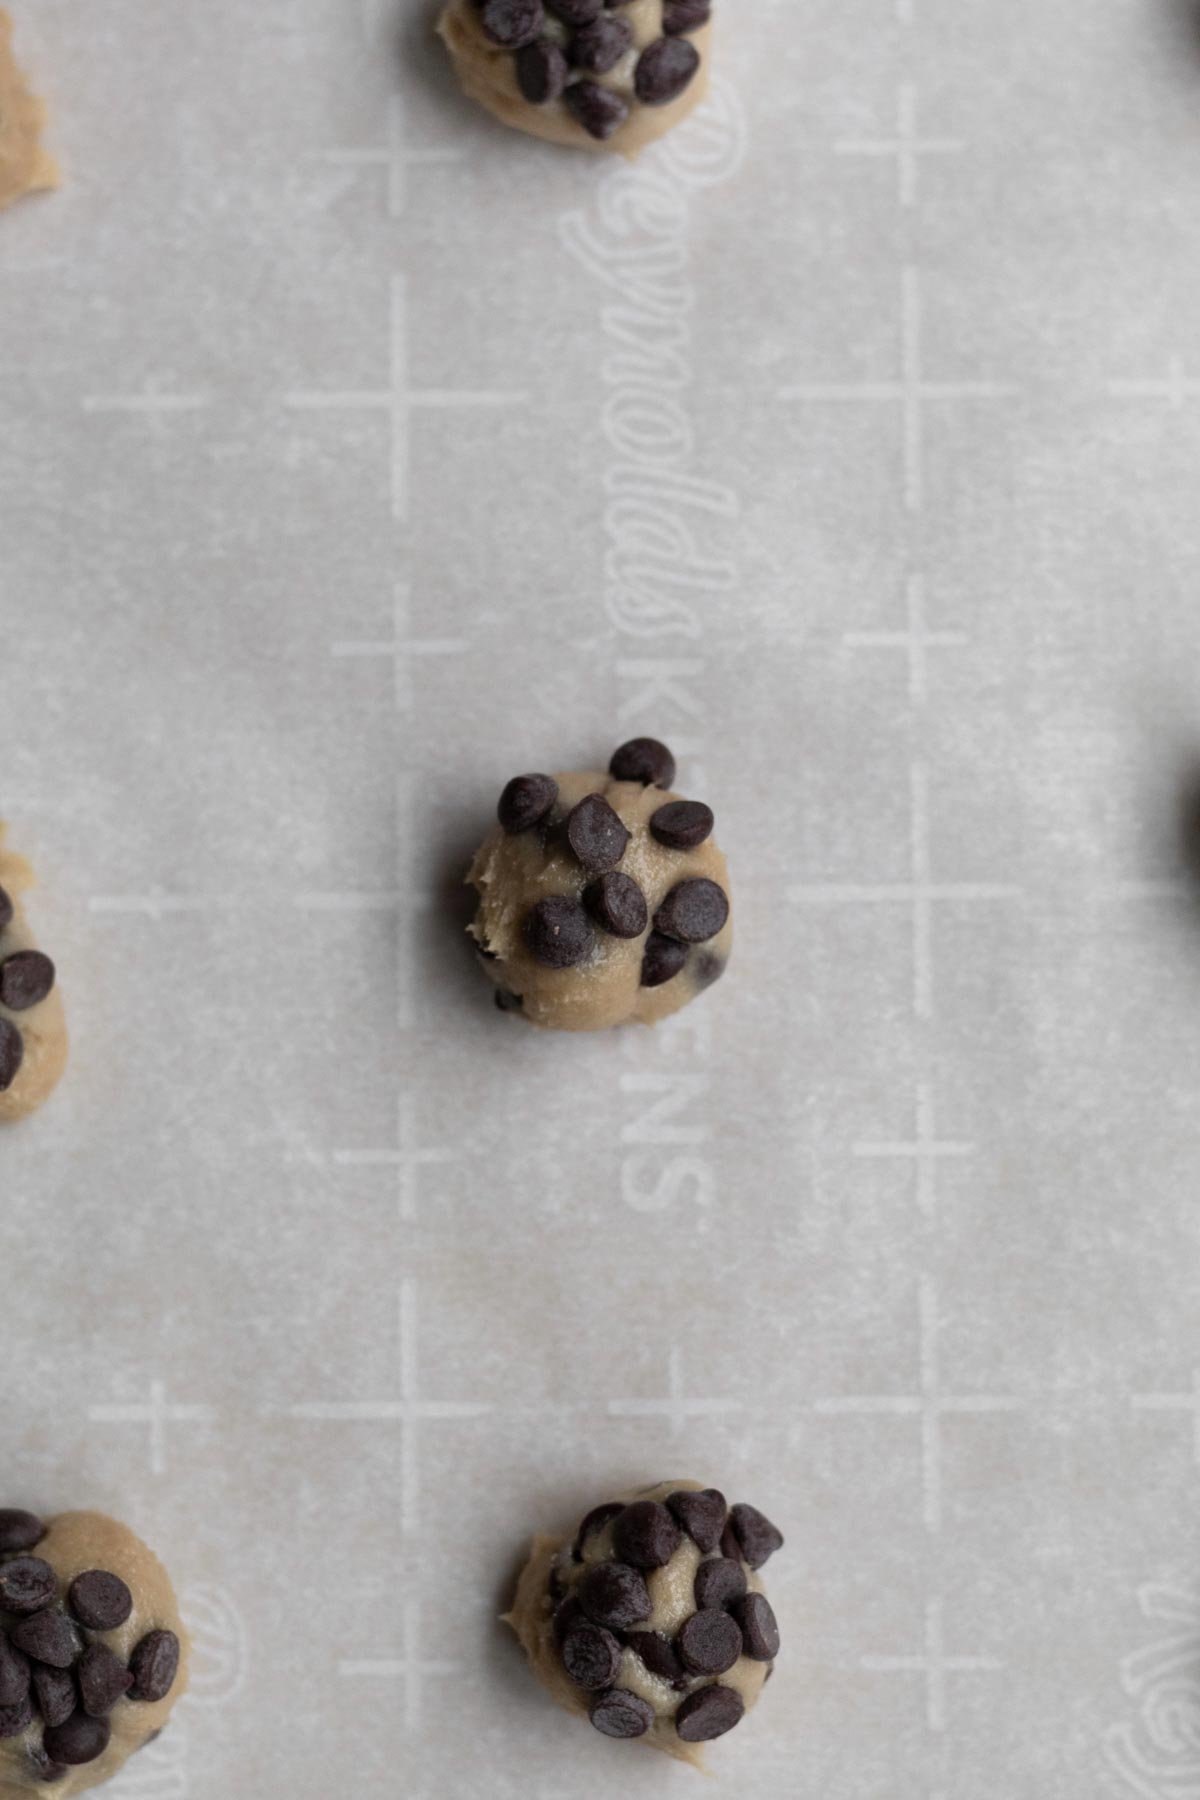 Adding extra chocolate chips to the dough balls.